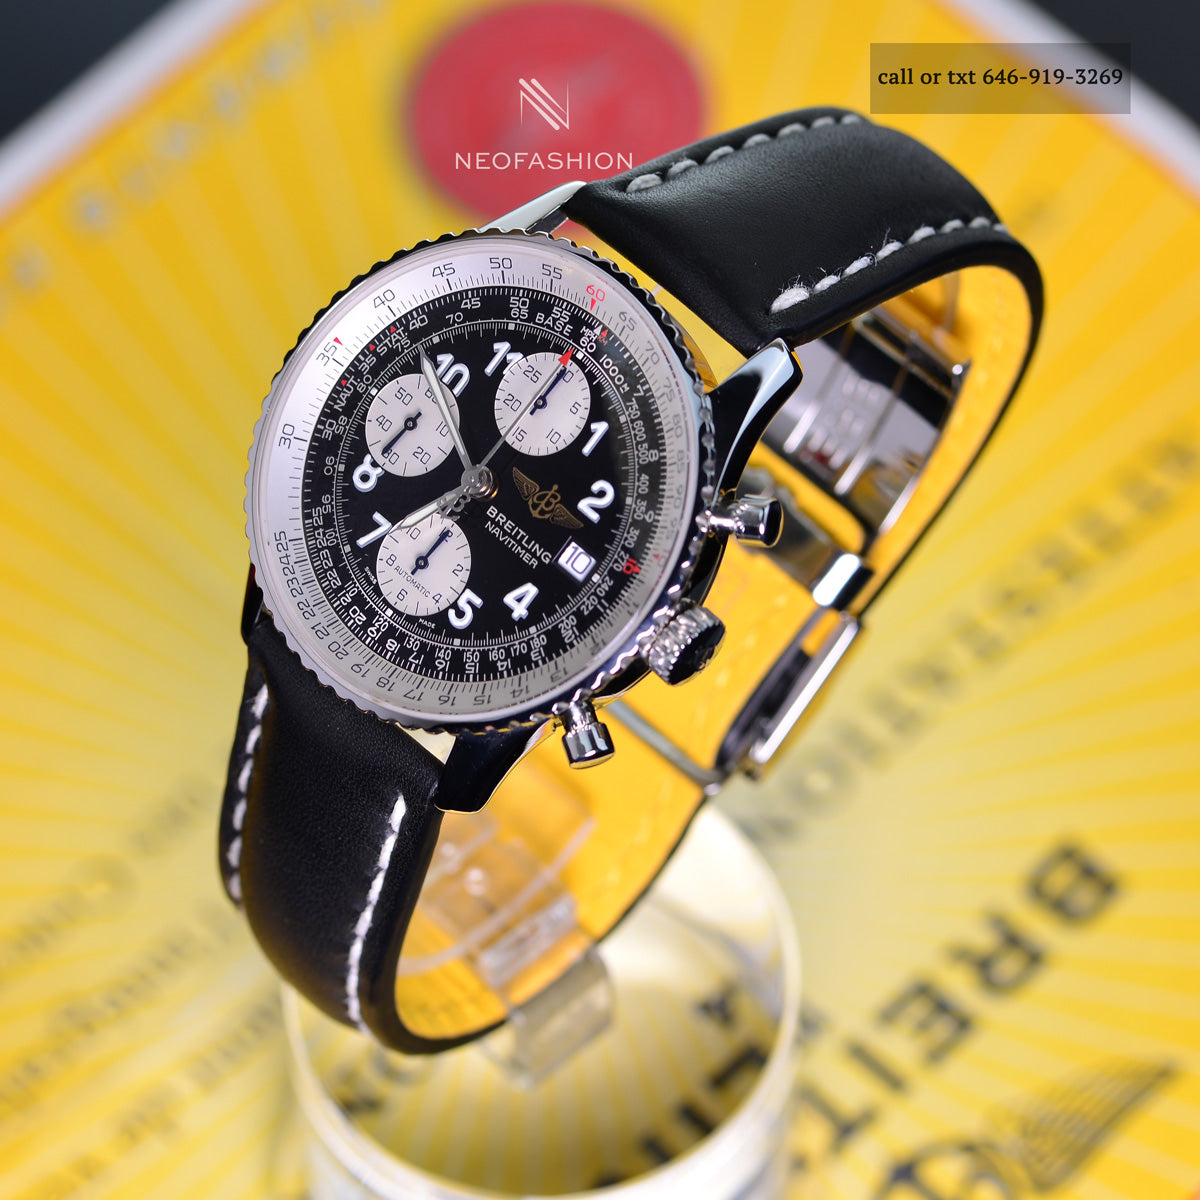 Breitling Navitimer Men's Black Watch with Stainless Steel/Yellow Gold  Bracelet - D13022 for sale online